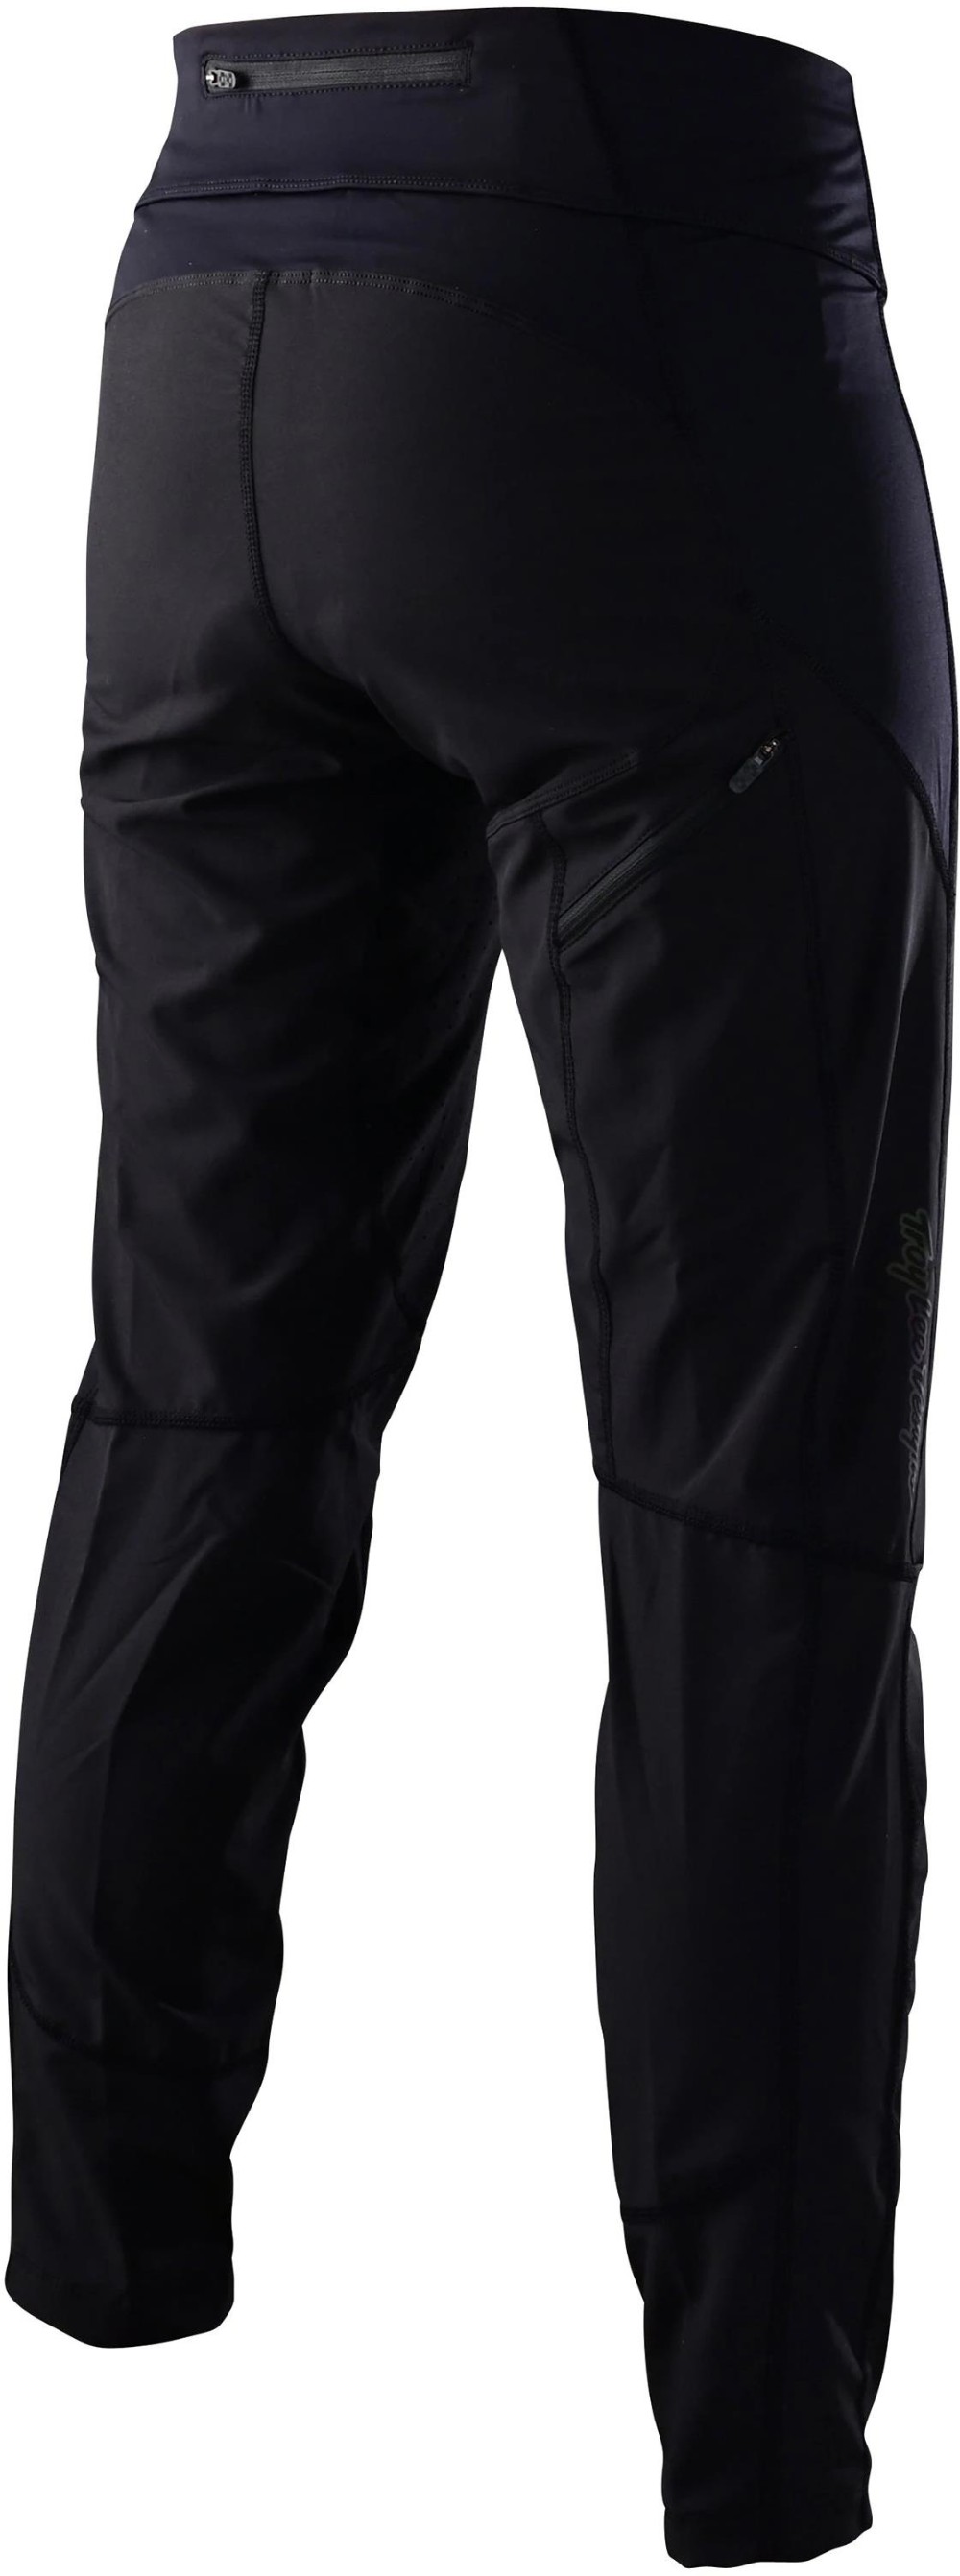 Luxe Womens MTB Cycling Trousers image 1